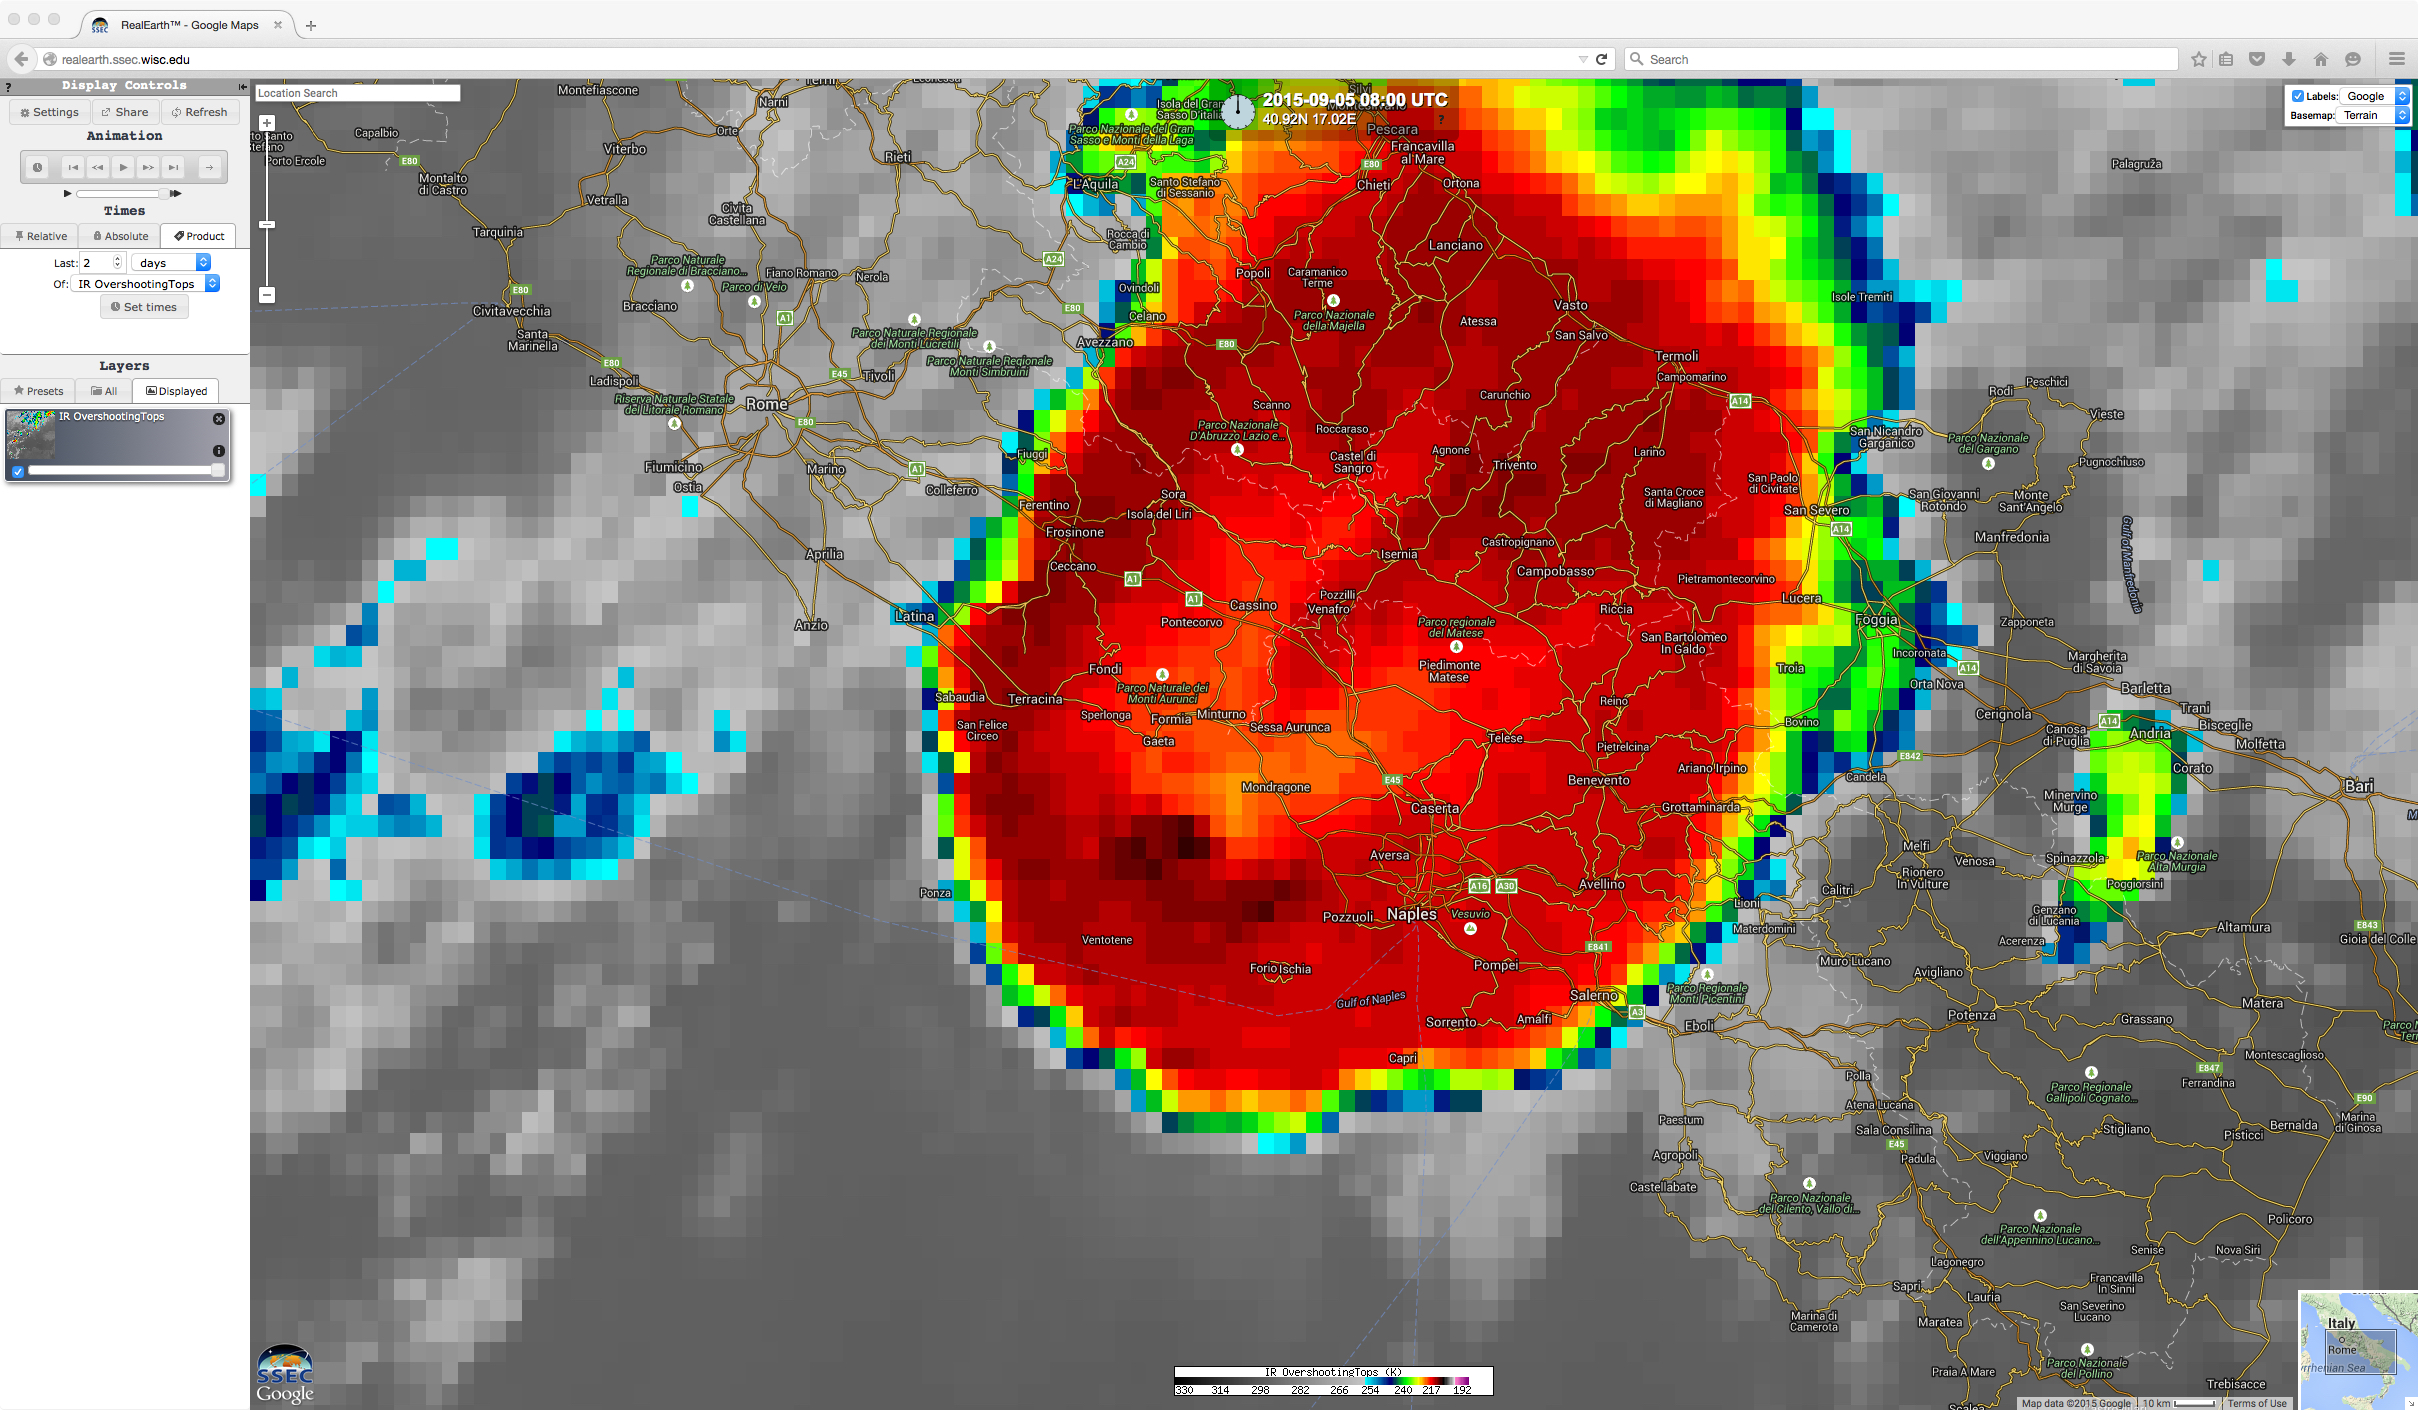 Meteosat-10 Infrared (10.8 µm) images [click to play animation]